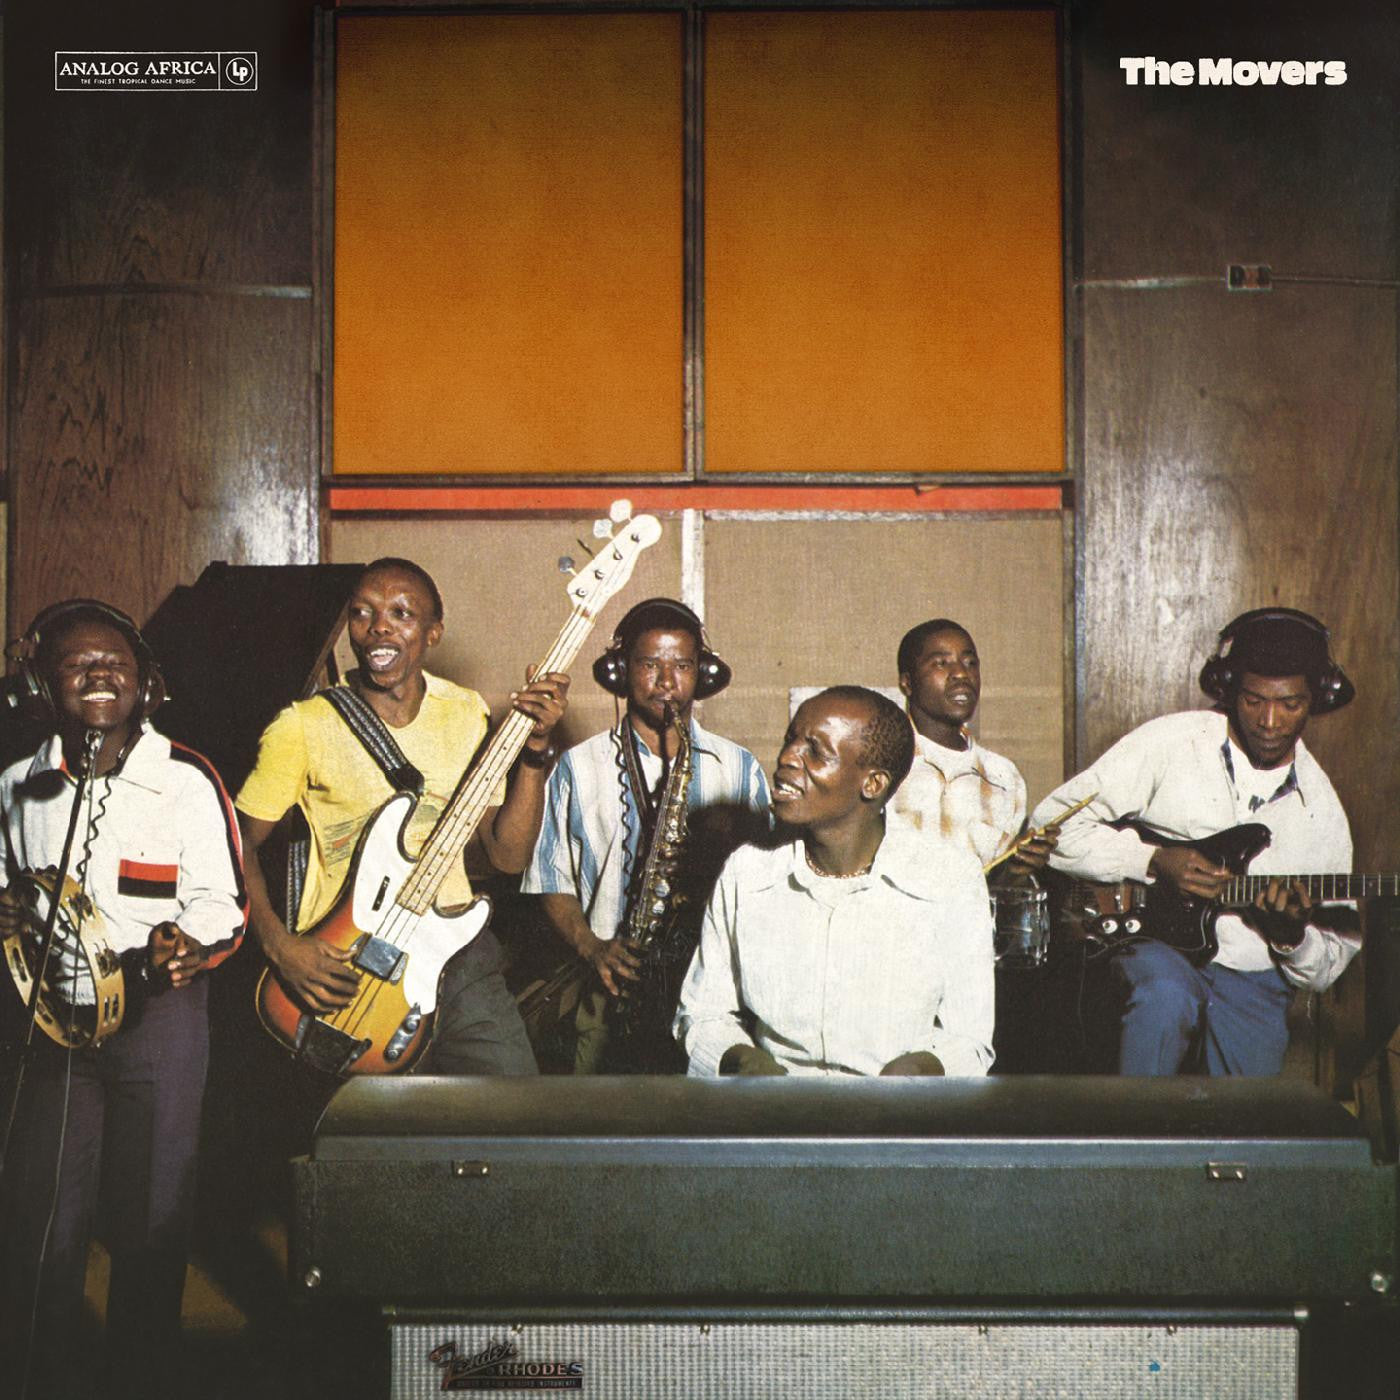 The Movers - The Movers: Vol. 1 - 1970-1976 (Analog Africa No.35)